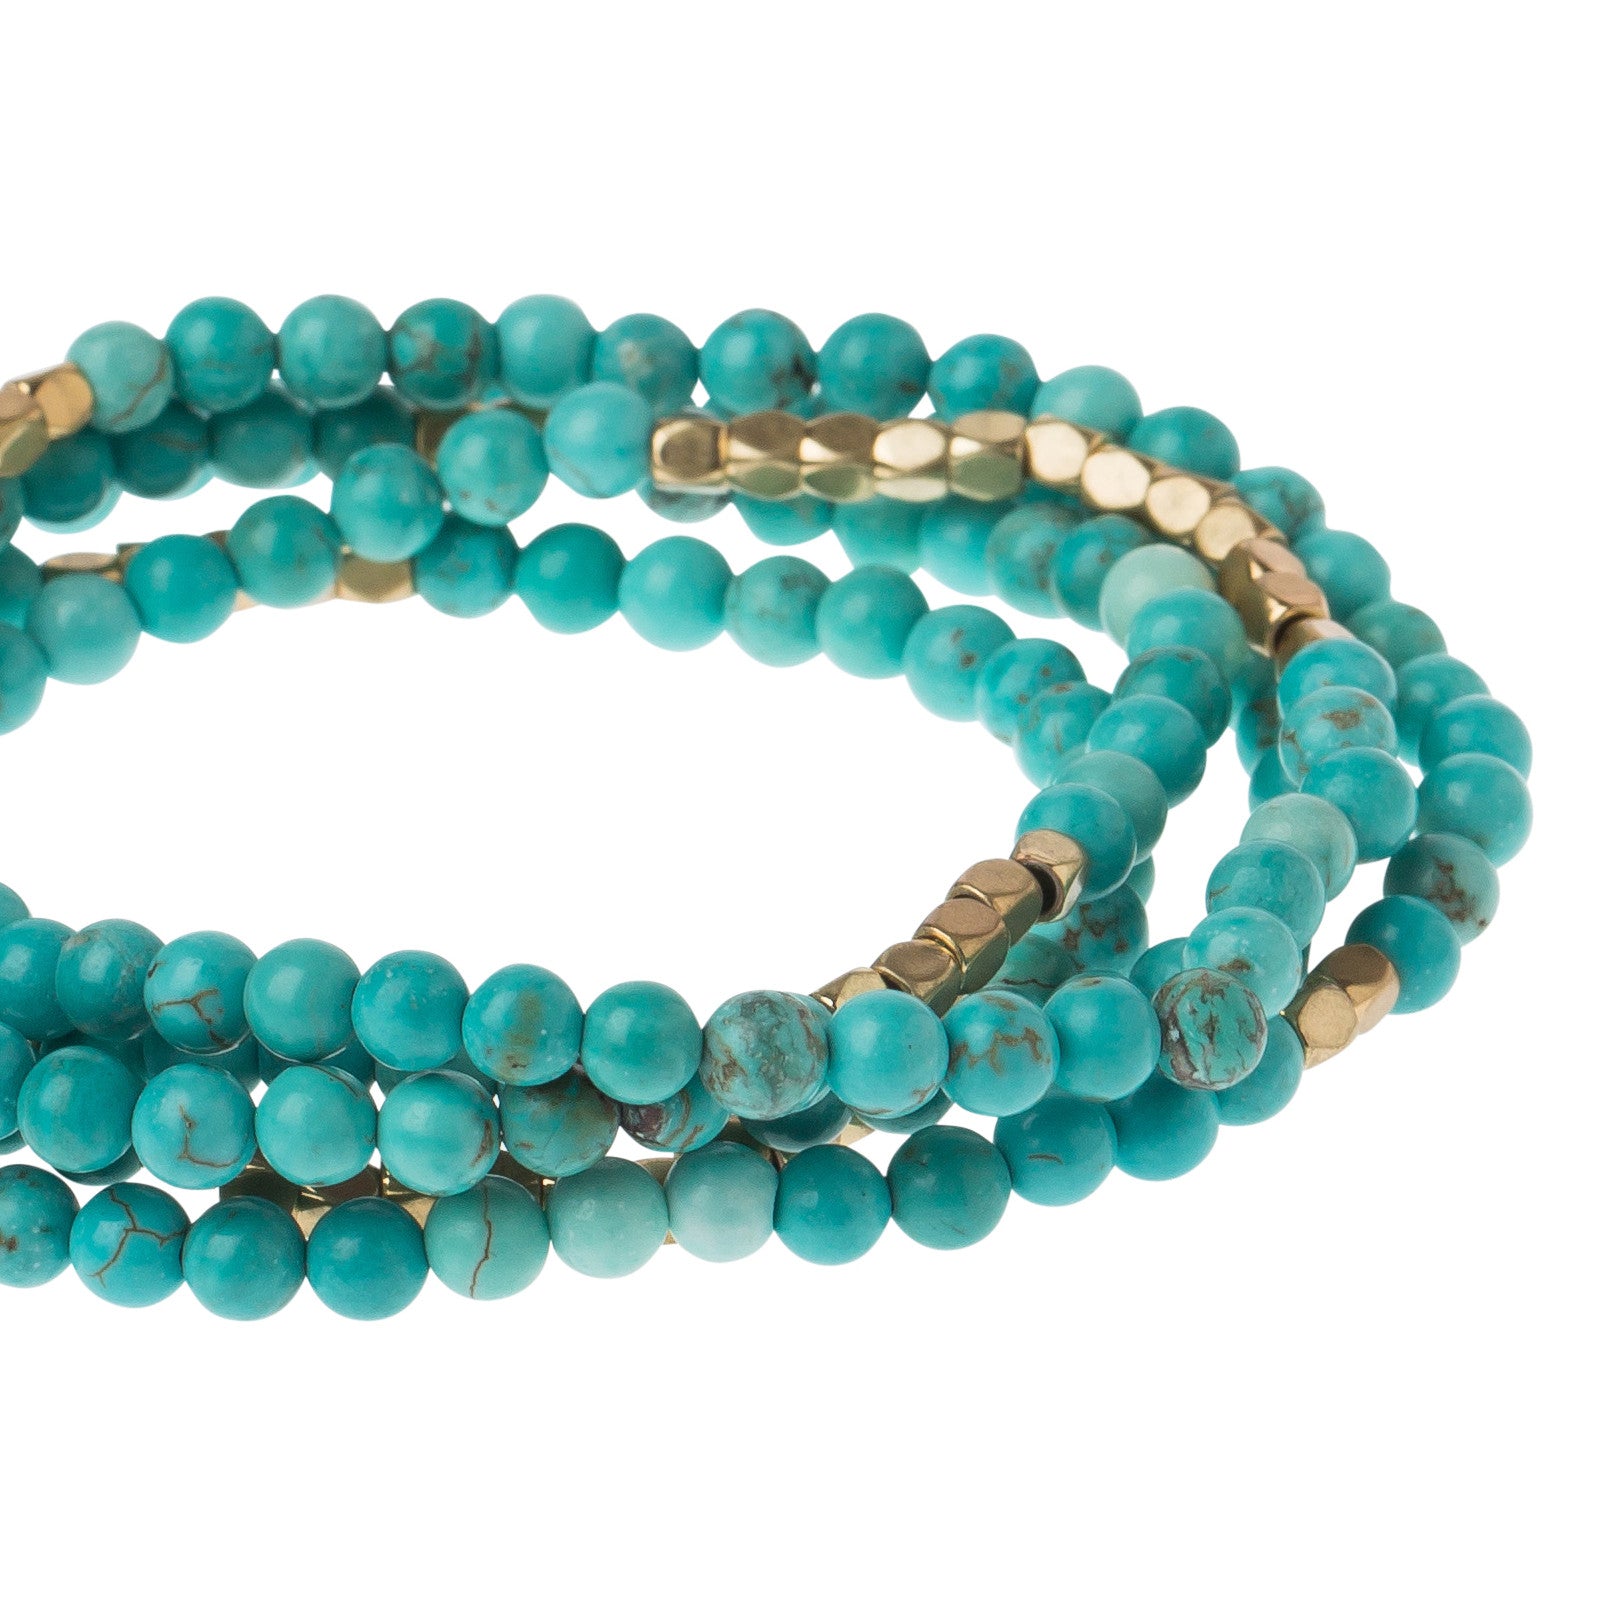 Turquoise - Stone Of The Sky Bracelet or Necklace, Gold — Lost Objects,  Found Treasures